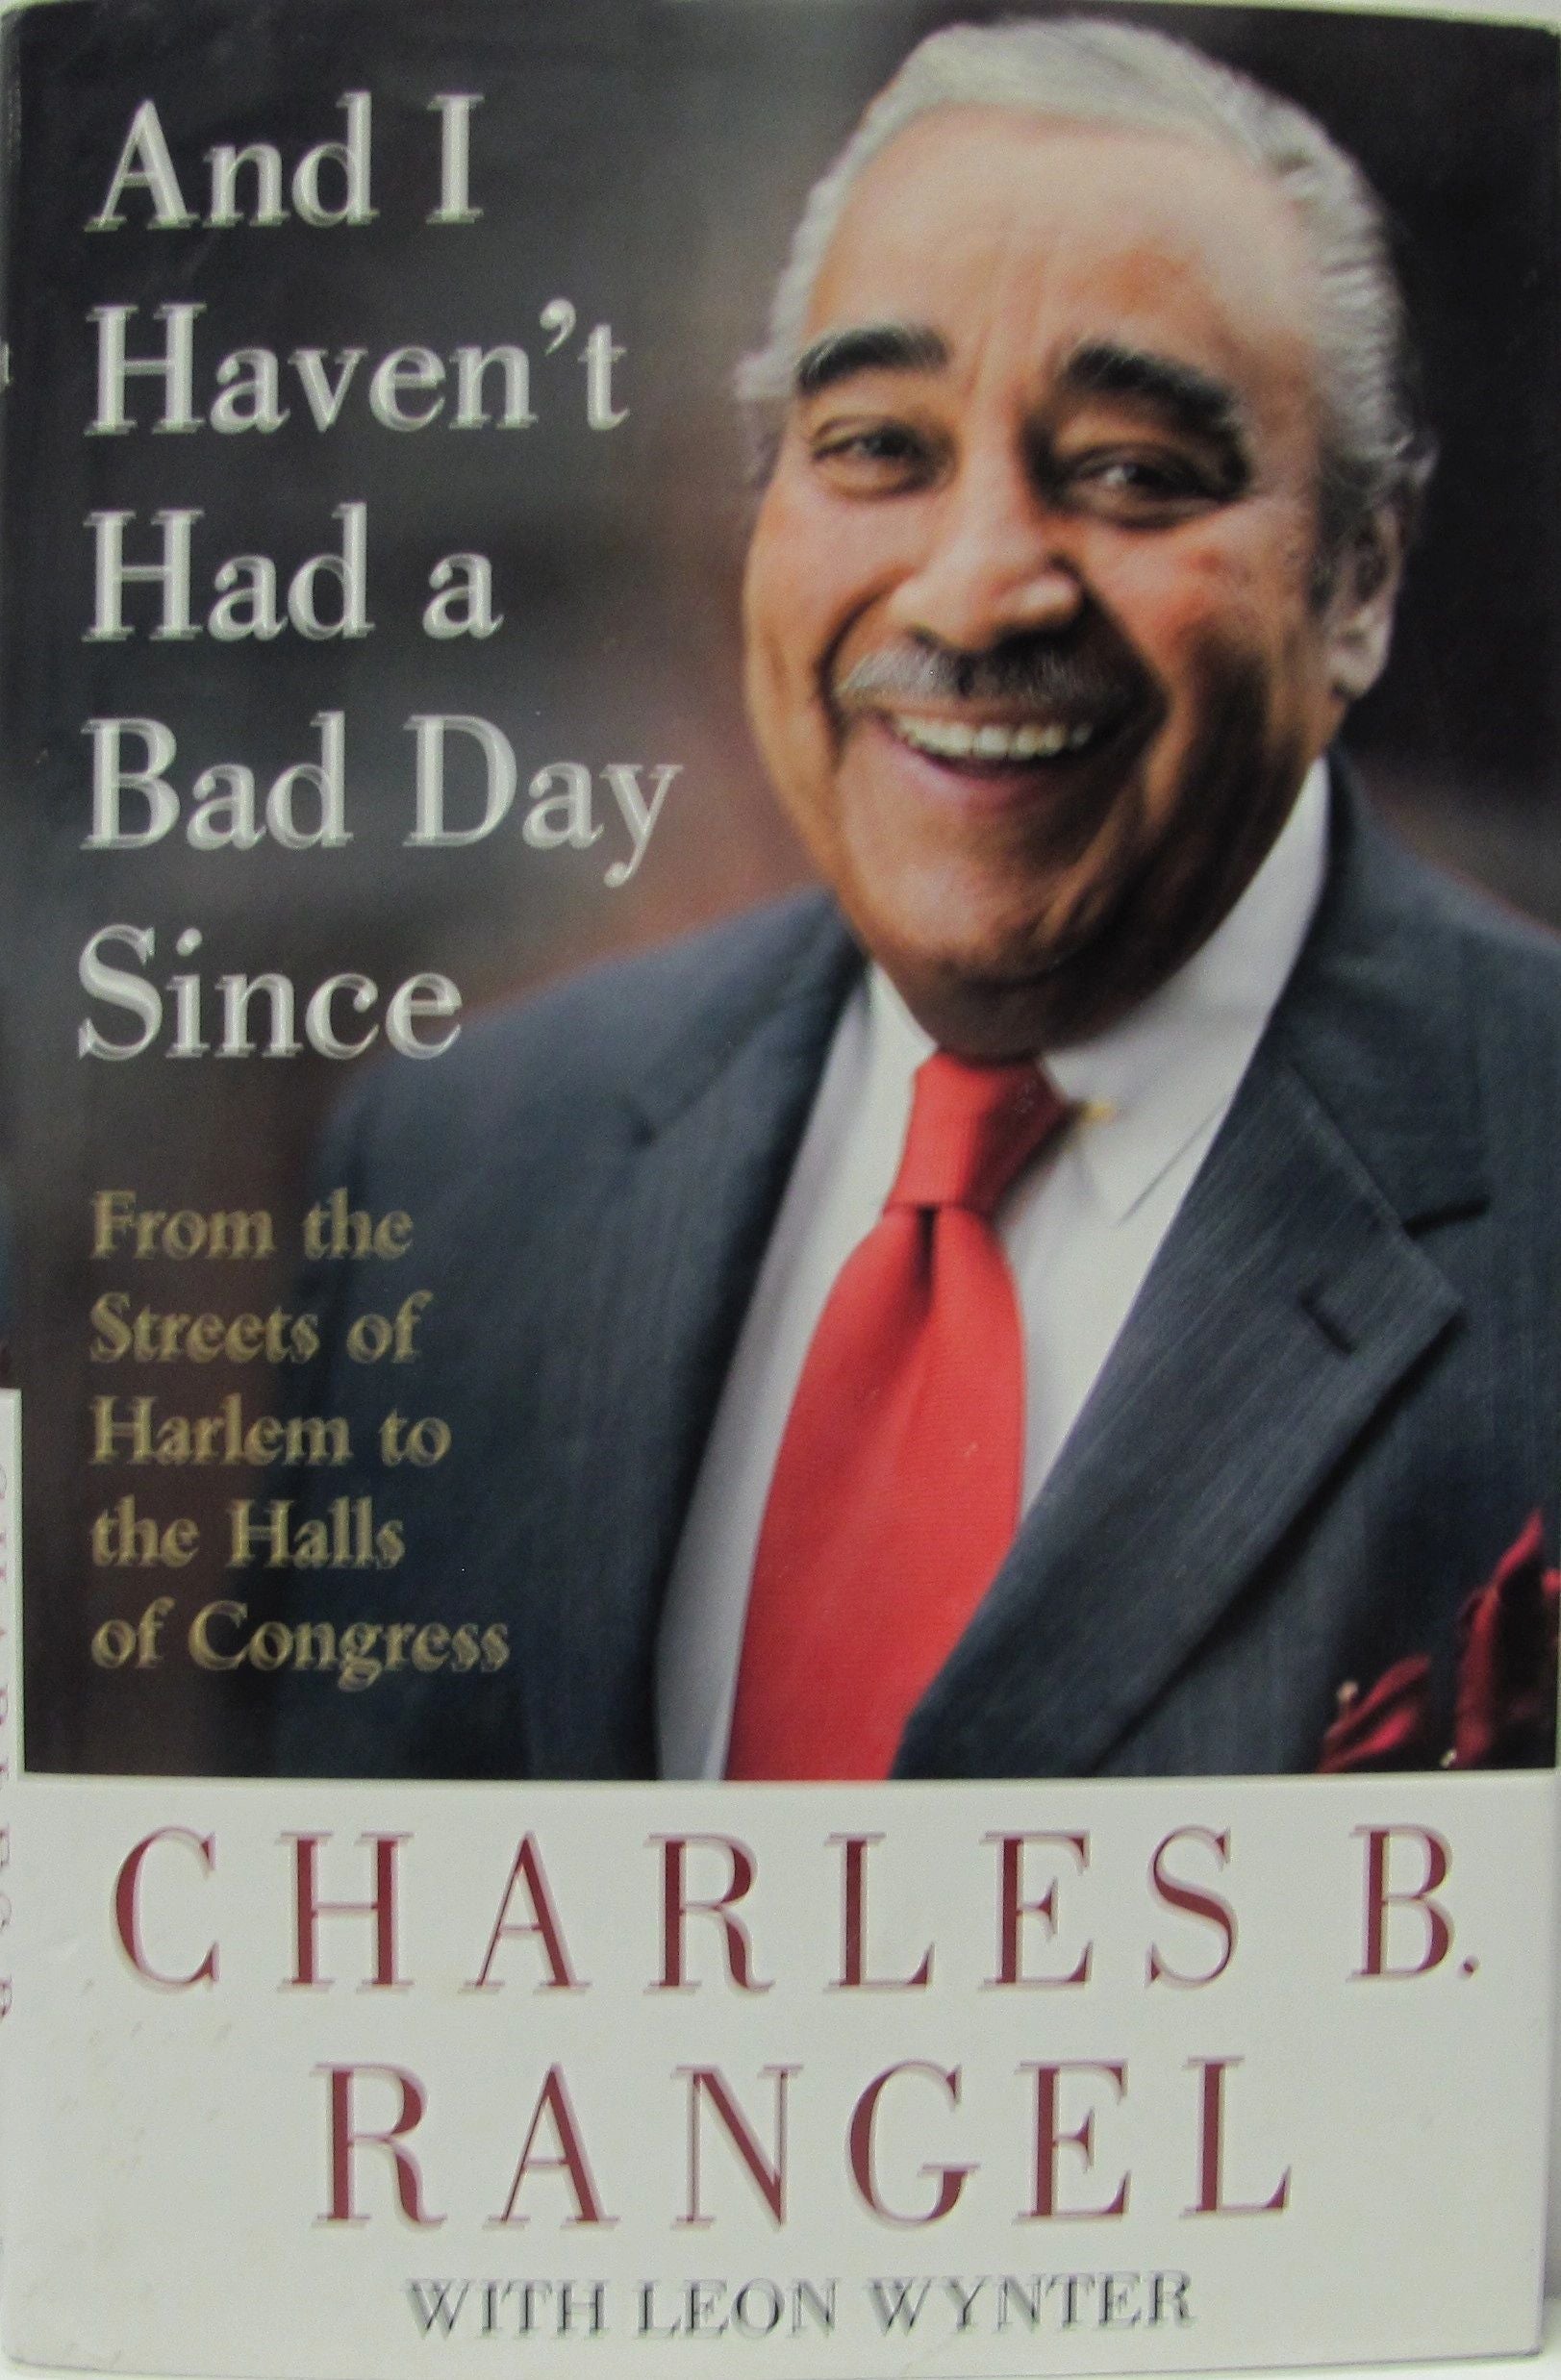 AND I HAVEN'T HAD A BAD DAY SINCE From the Streets of Harlem to the Halls of Congress Charles B. Rangel SIGNED W/JSA COA